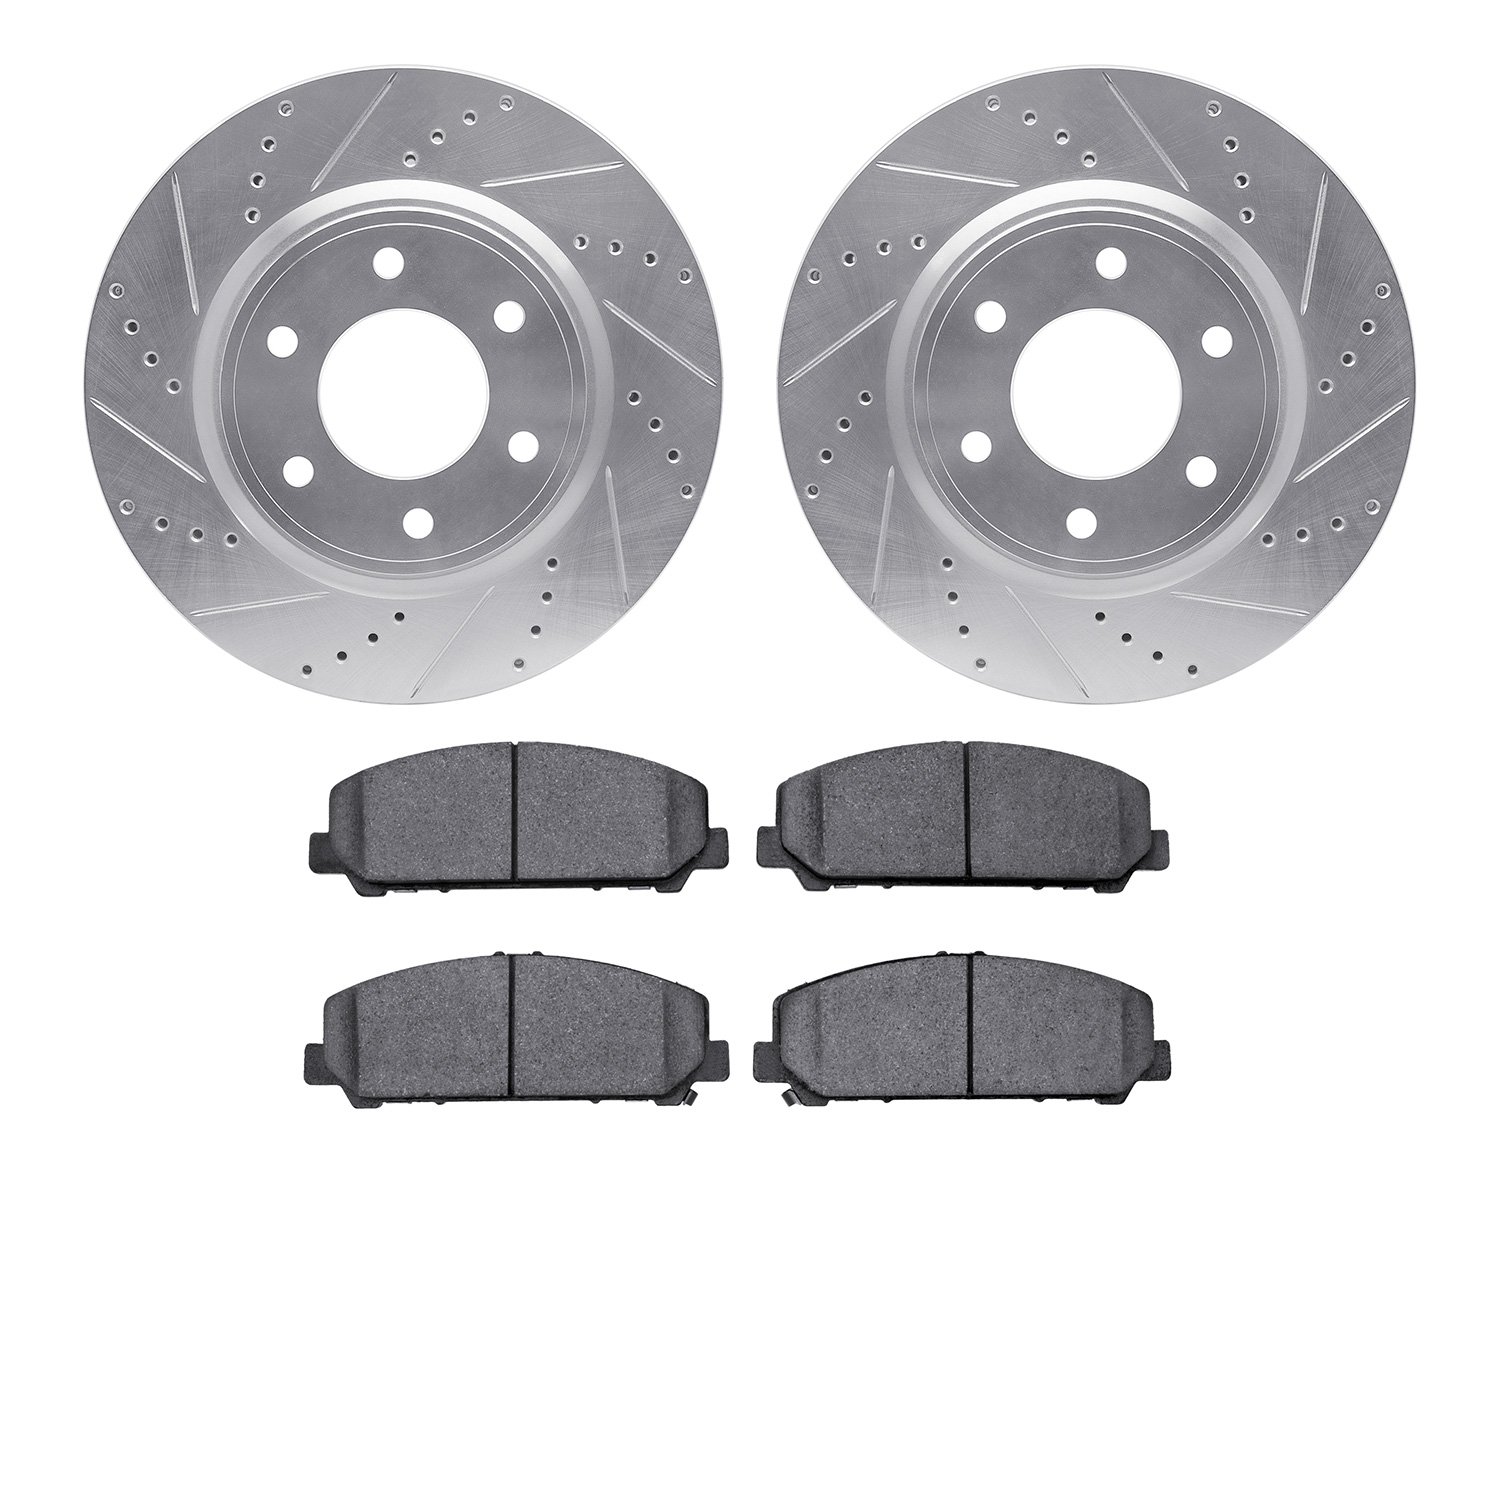 7402-68001 Drilled/Slotted Brake Rotors with Ultimate-Duty Brake Pads Kit [Silver], Fits Select Infiniti/Nissan, Position: Front